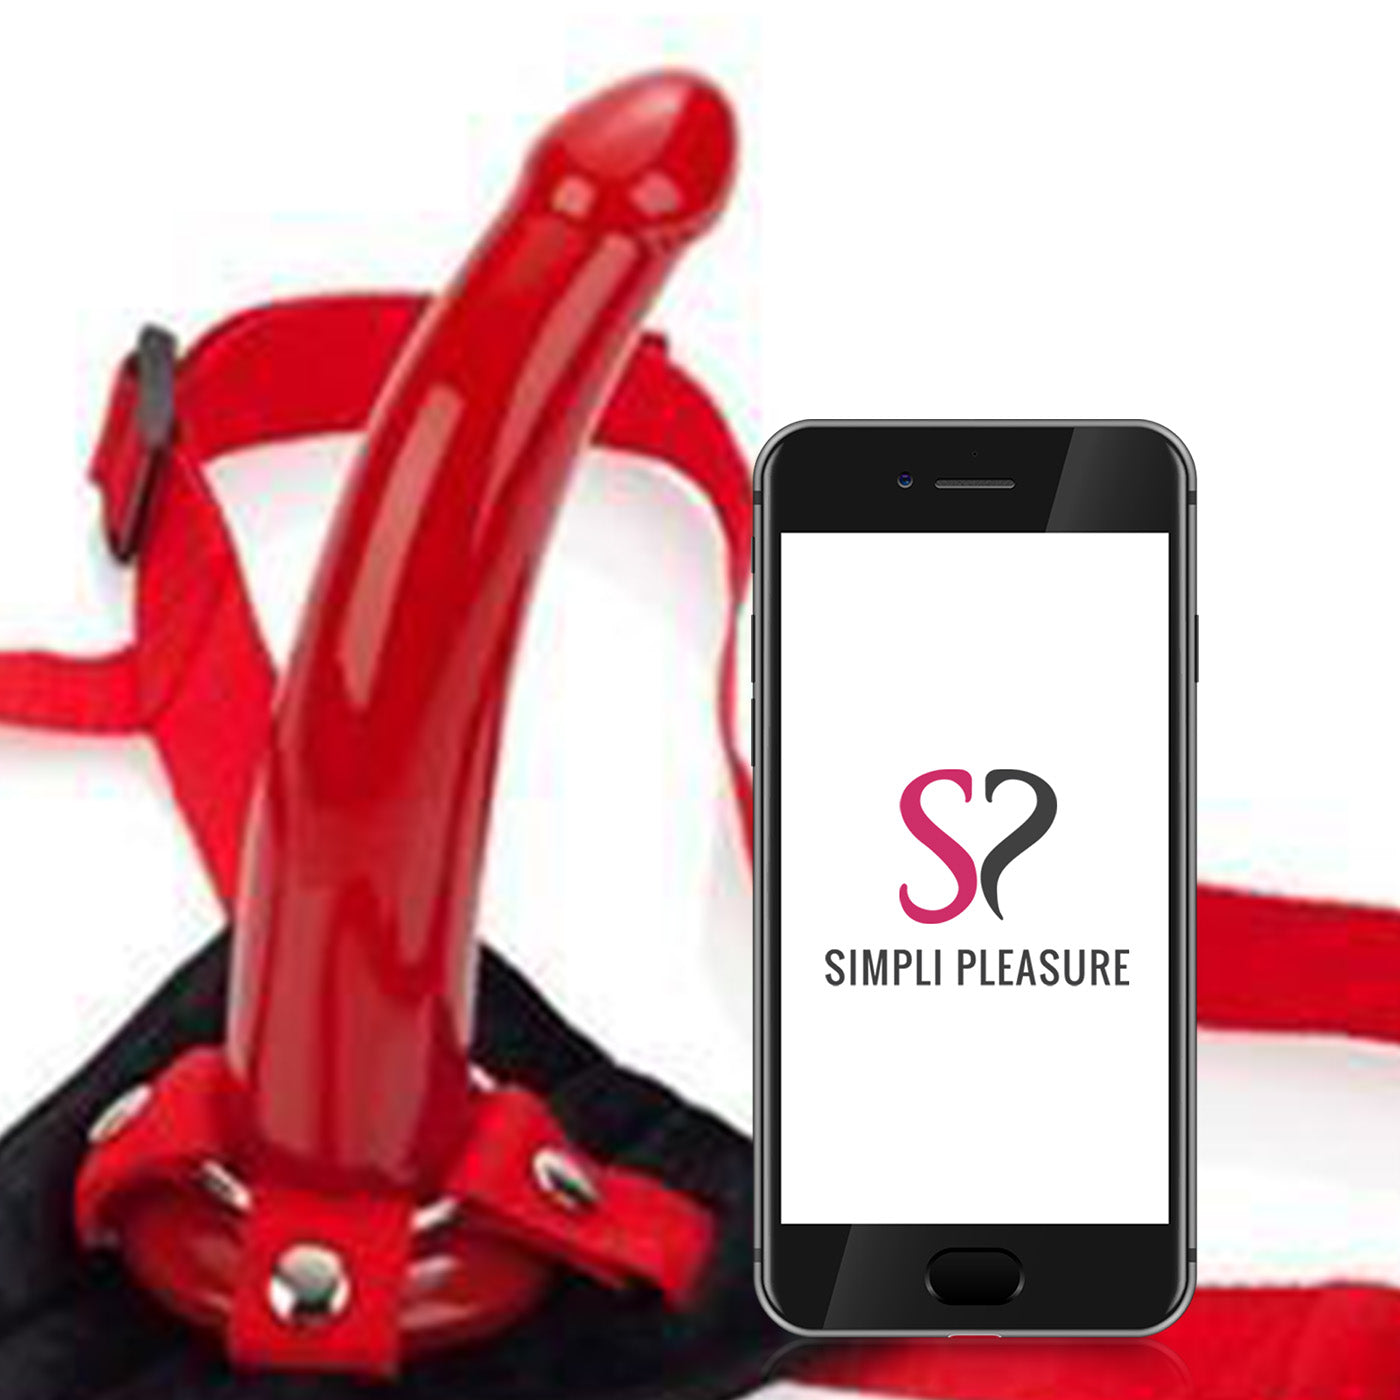 Sophia's Red Rider Harness and G-Spot Strap-On  Dildo